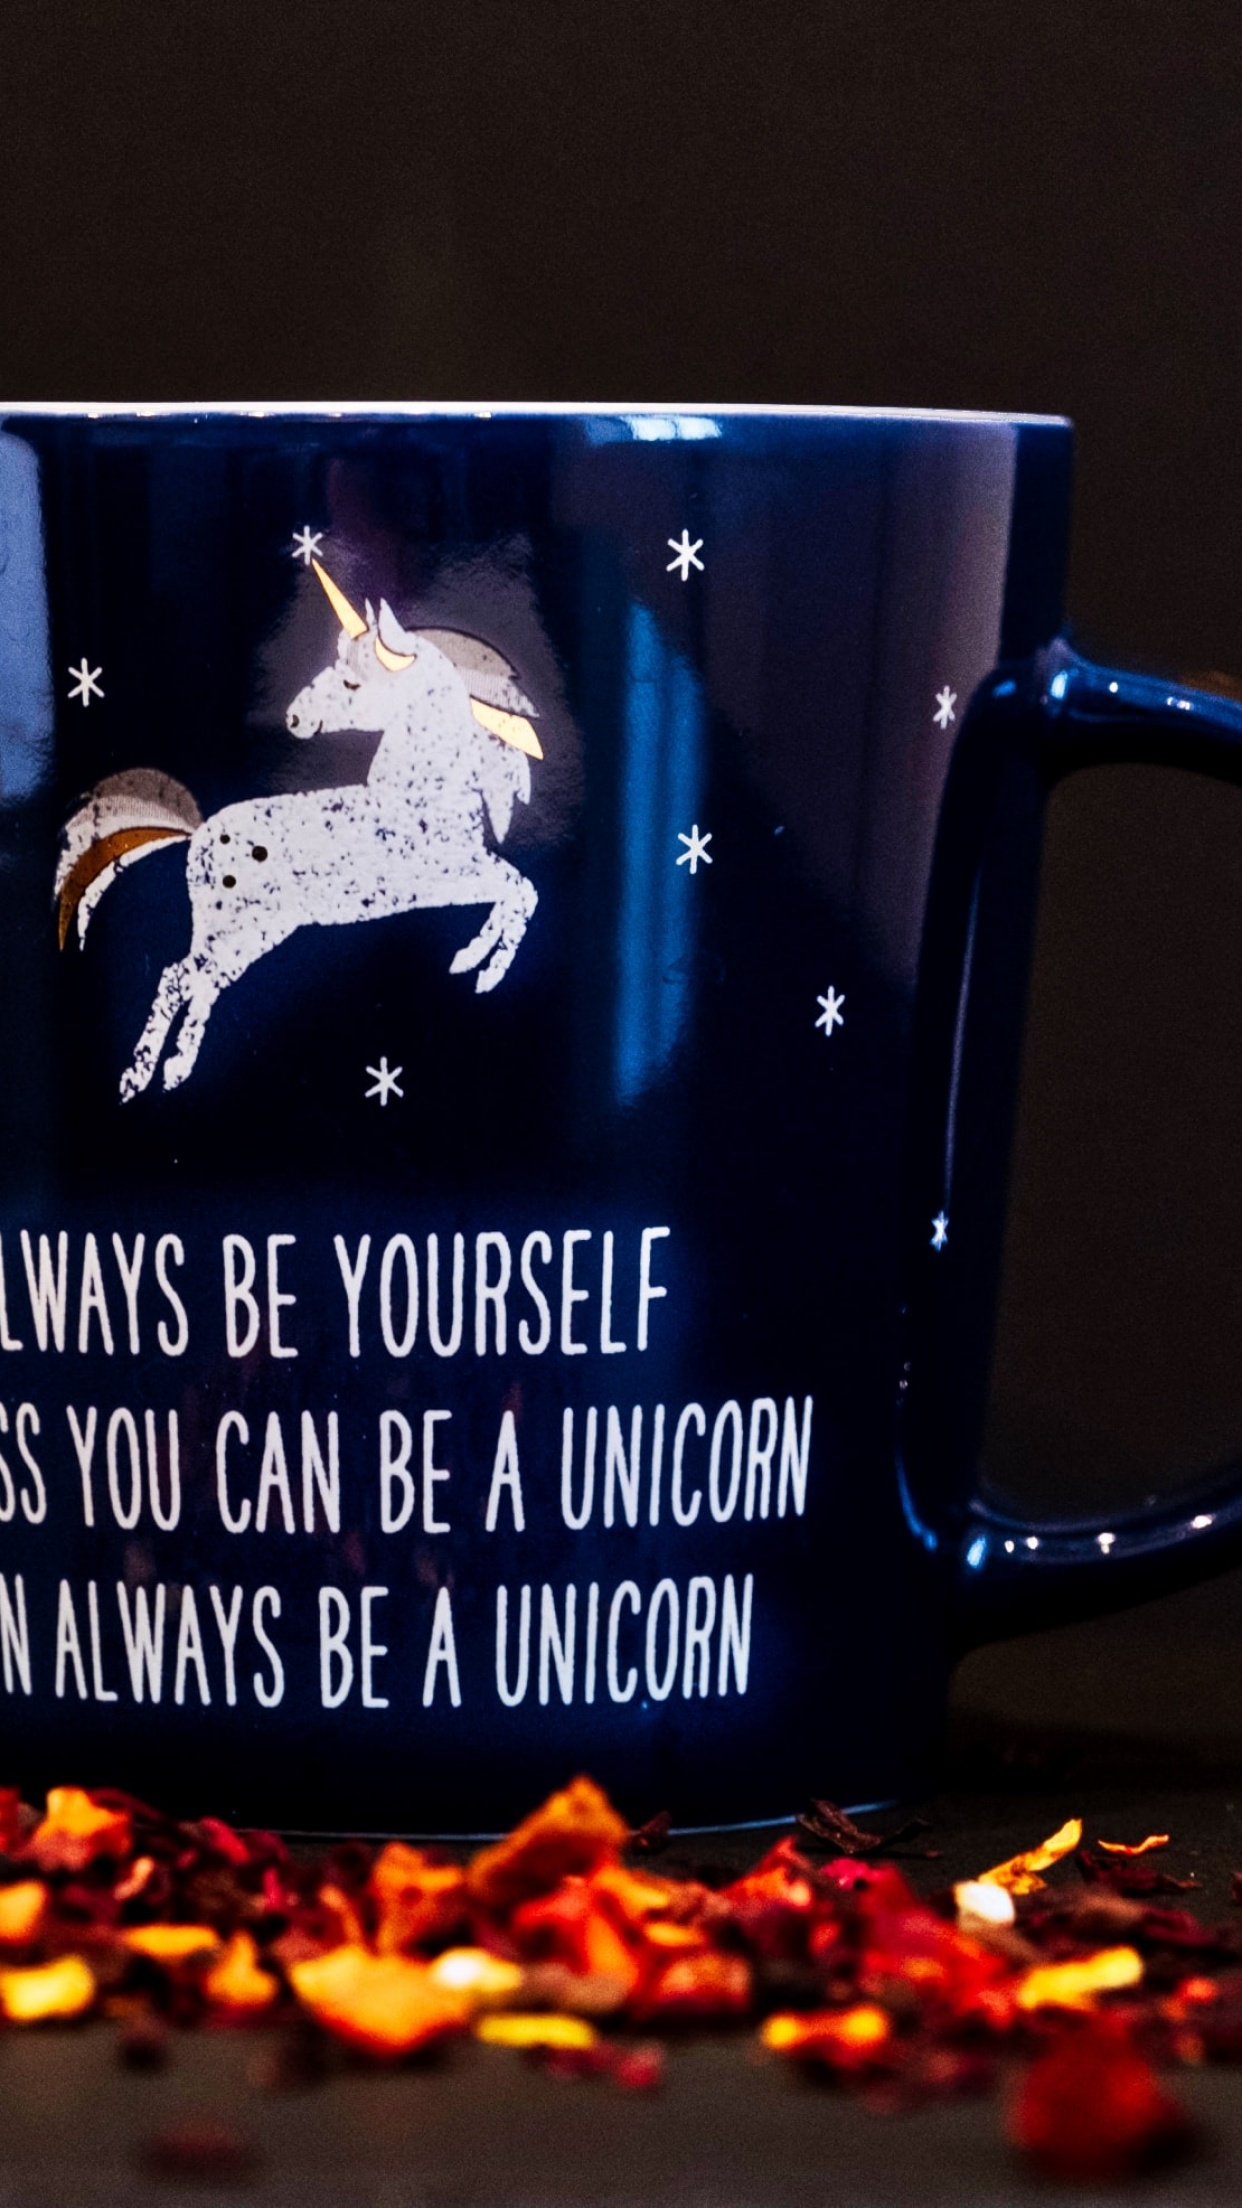 Coffee cup Wallpaper 4K, Blue, Unicorn, Dark background, Quotes, #2138